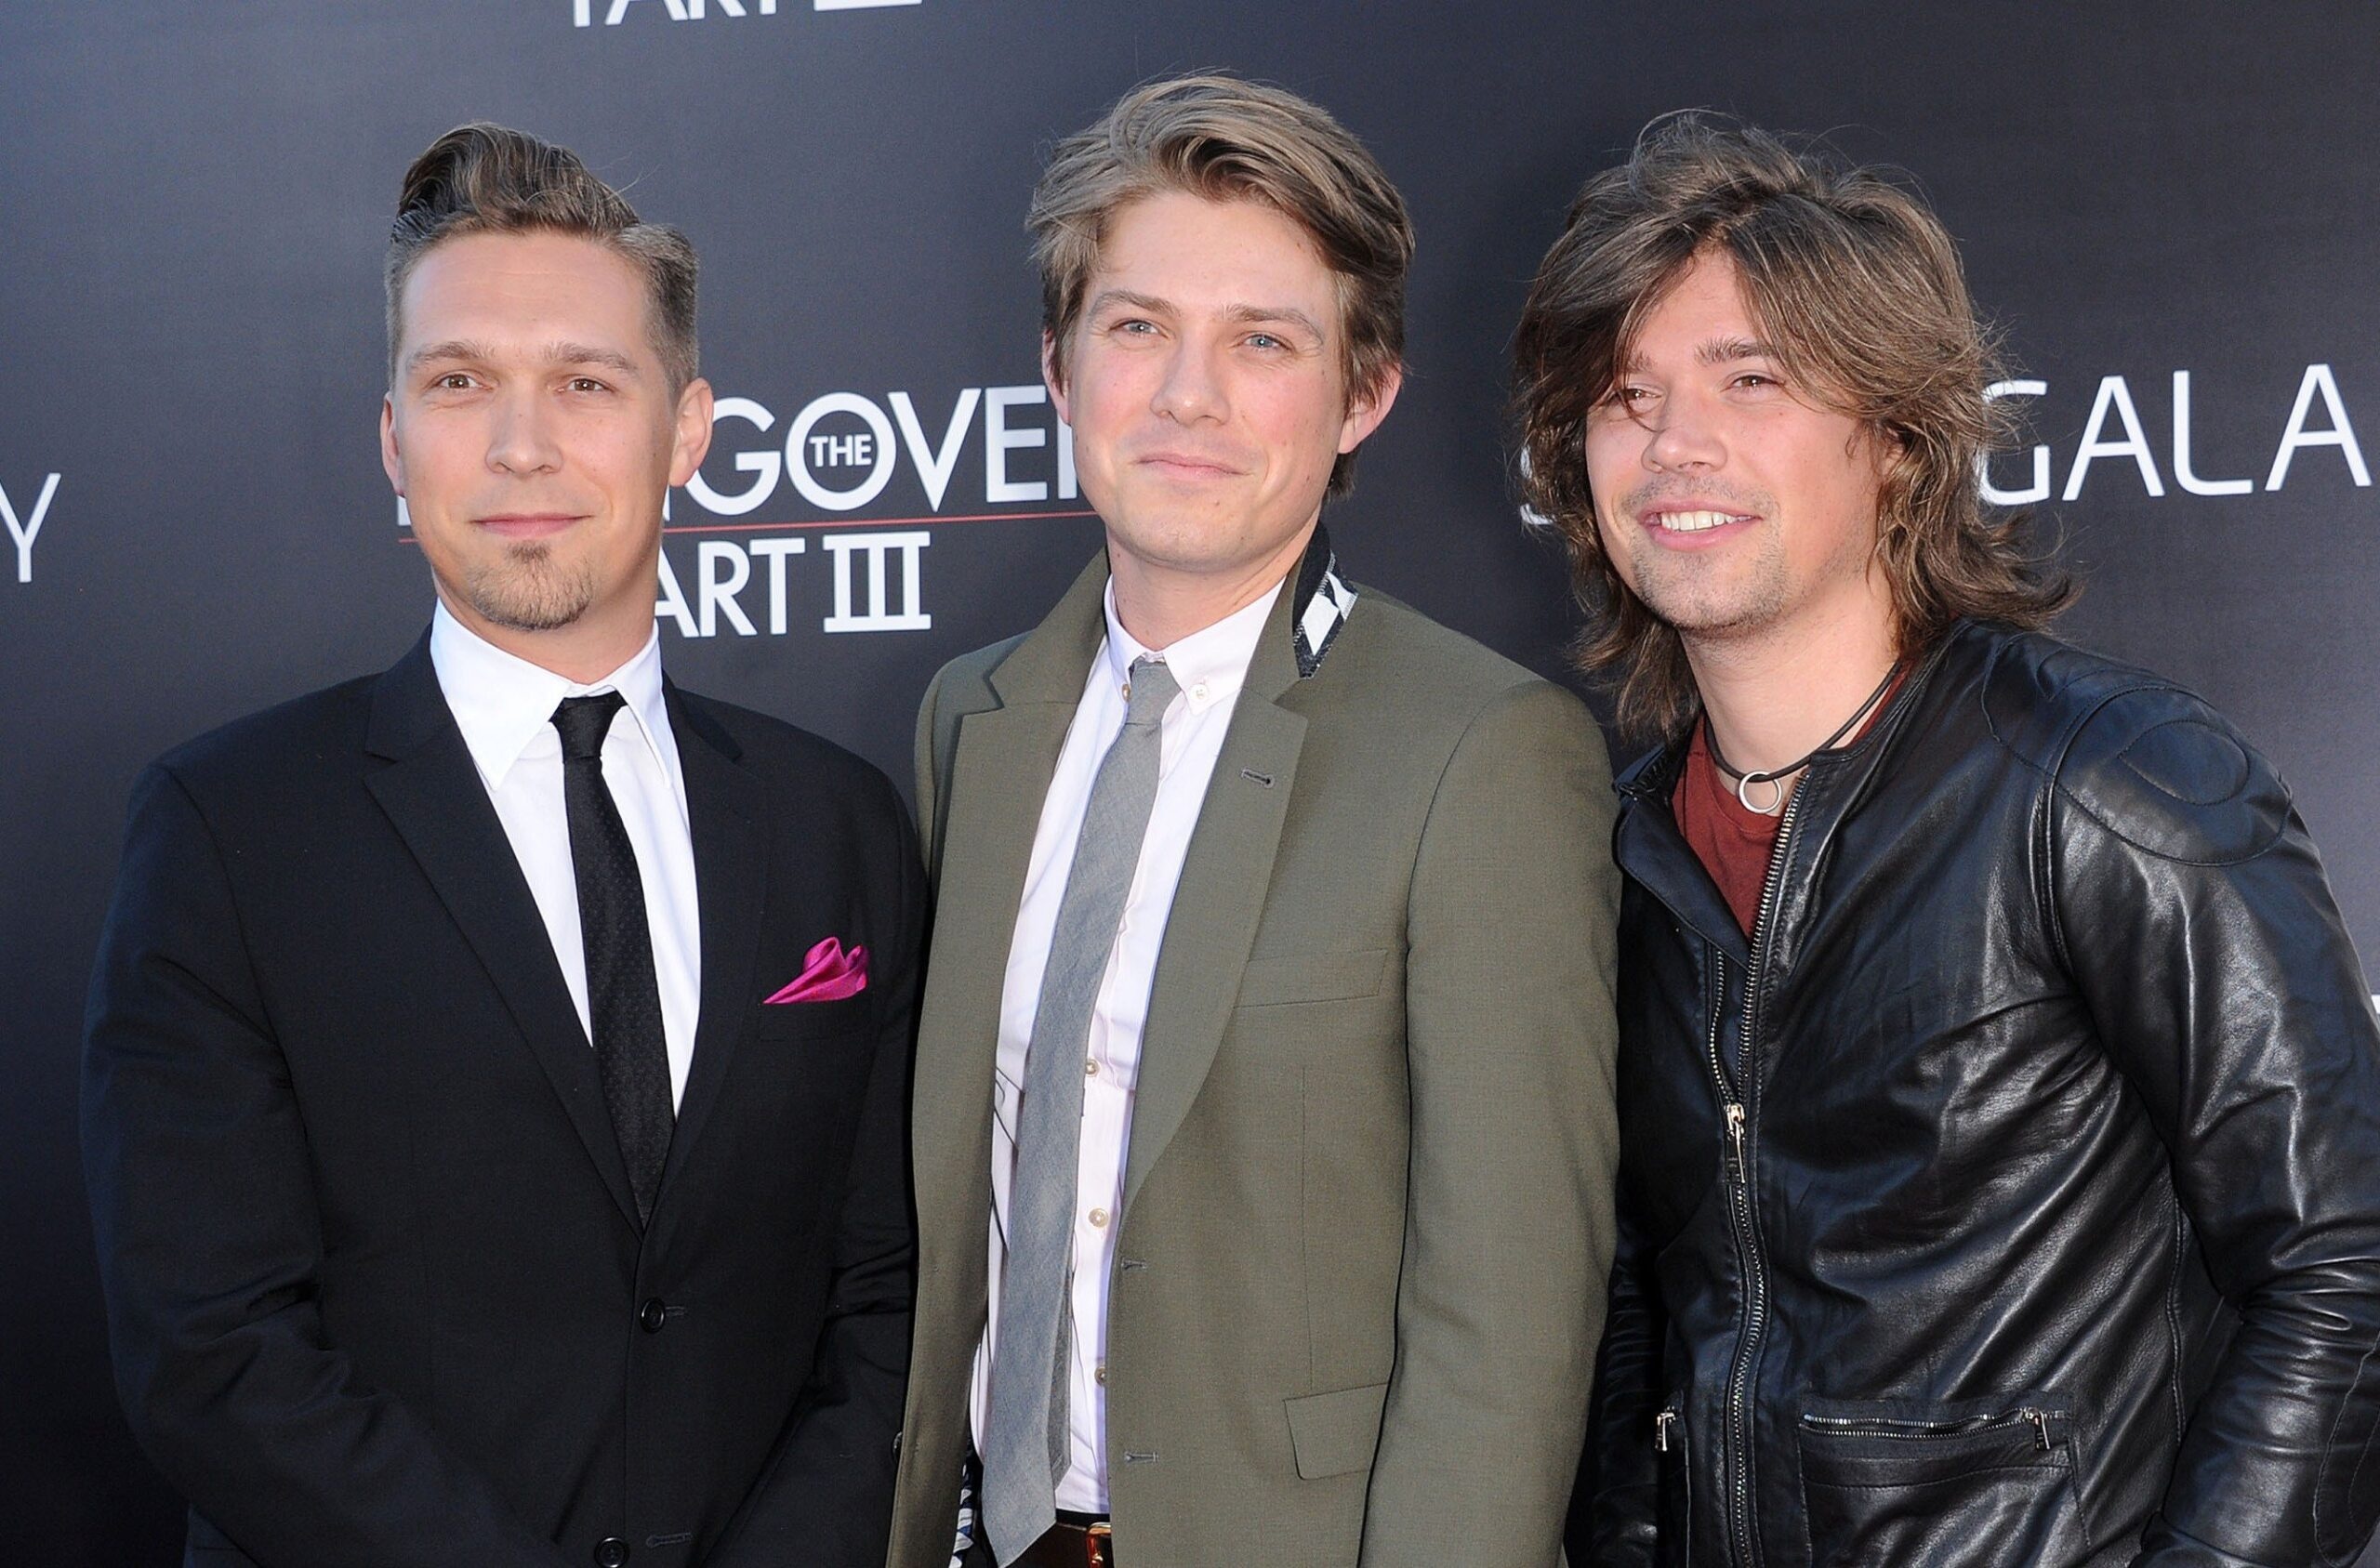 Taylor Hanson, Hanson brothers, Where are they now?, 2021 update, 2560x1690 HD Desktop